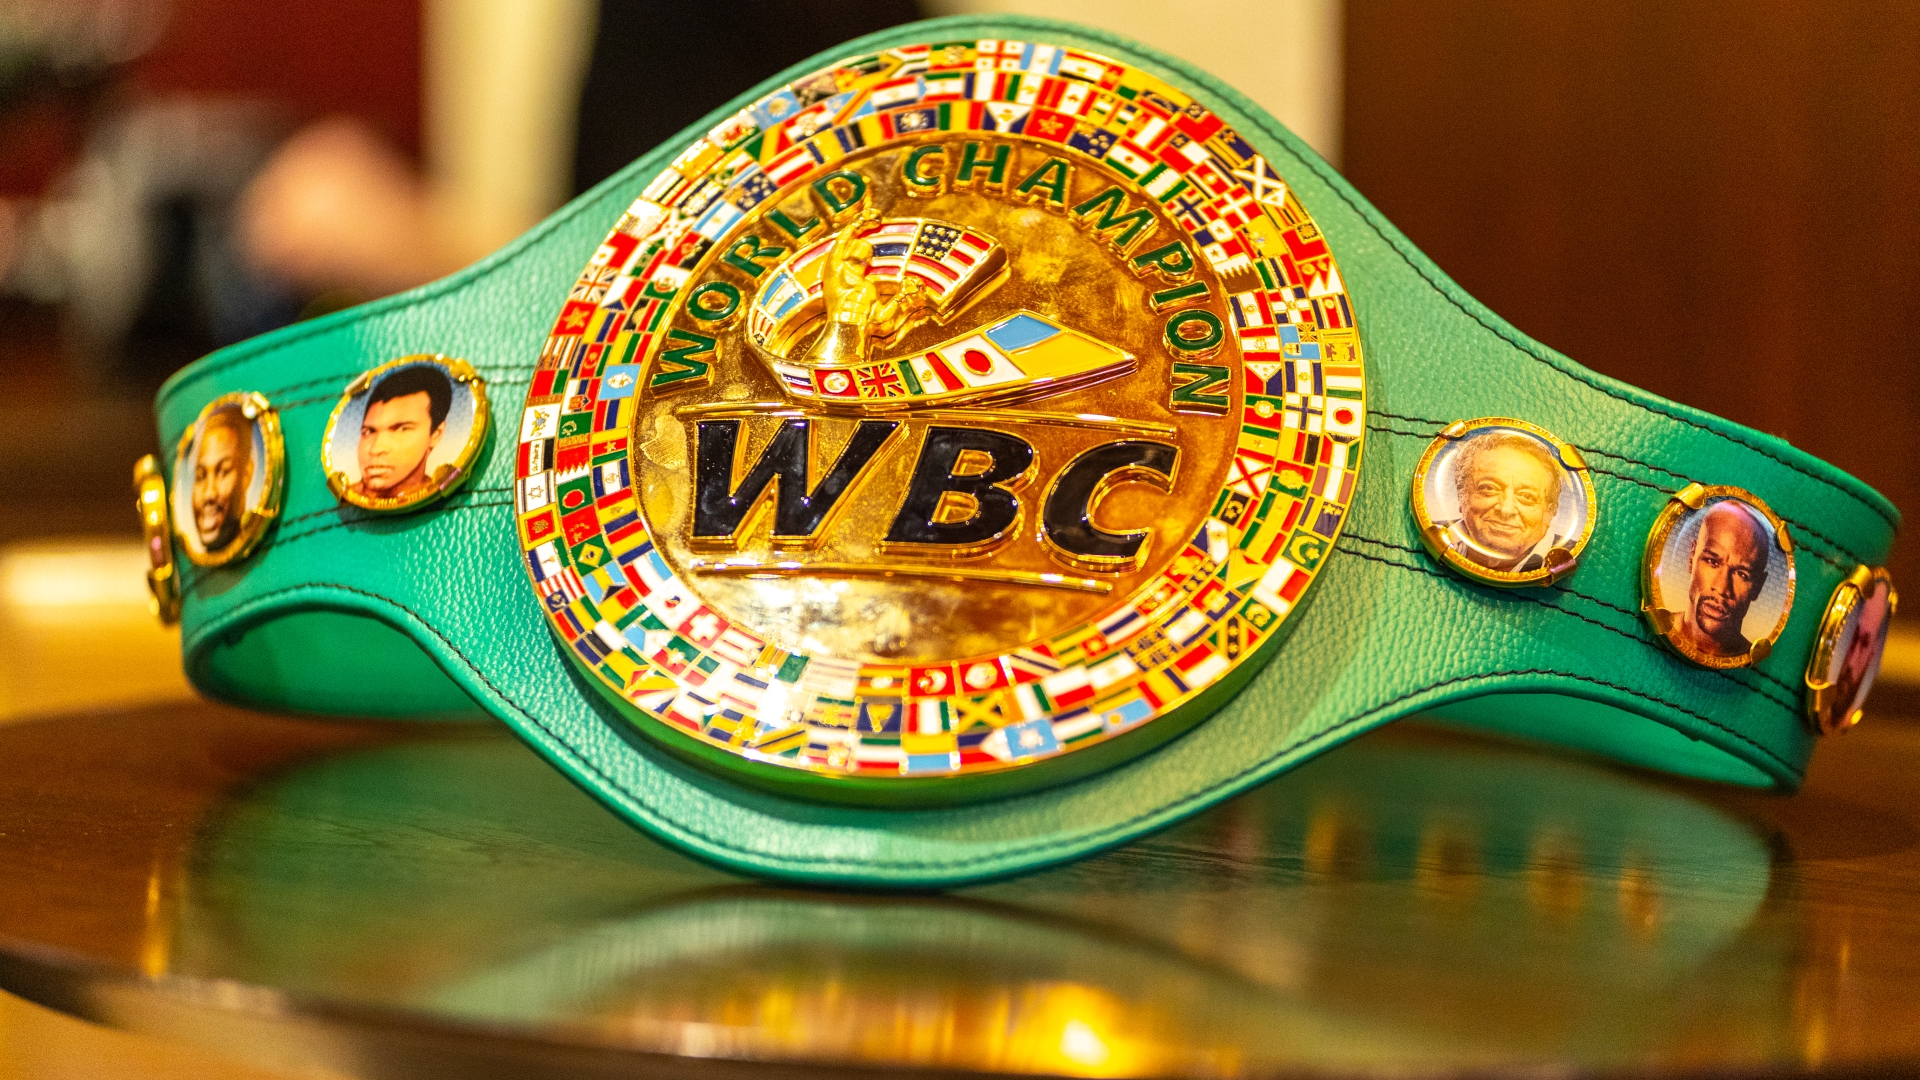 Latest Boxing News: WBC Transgender: Everything You Need to Know About Transgender Boxing